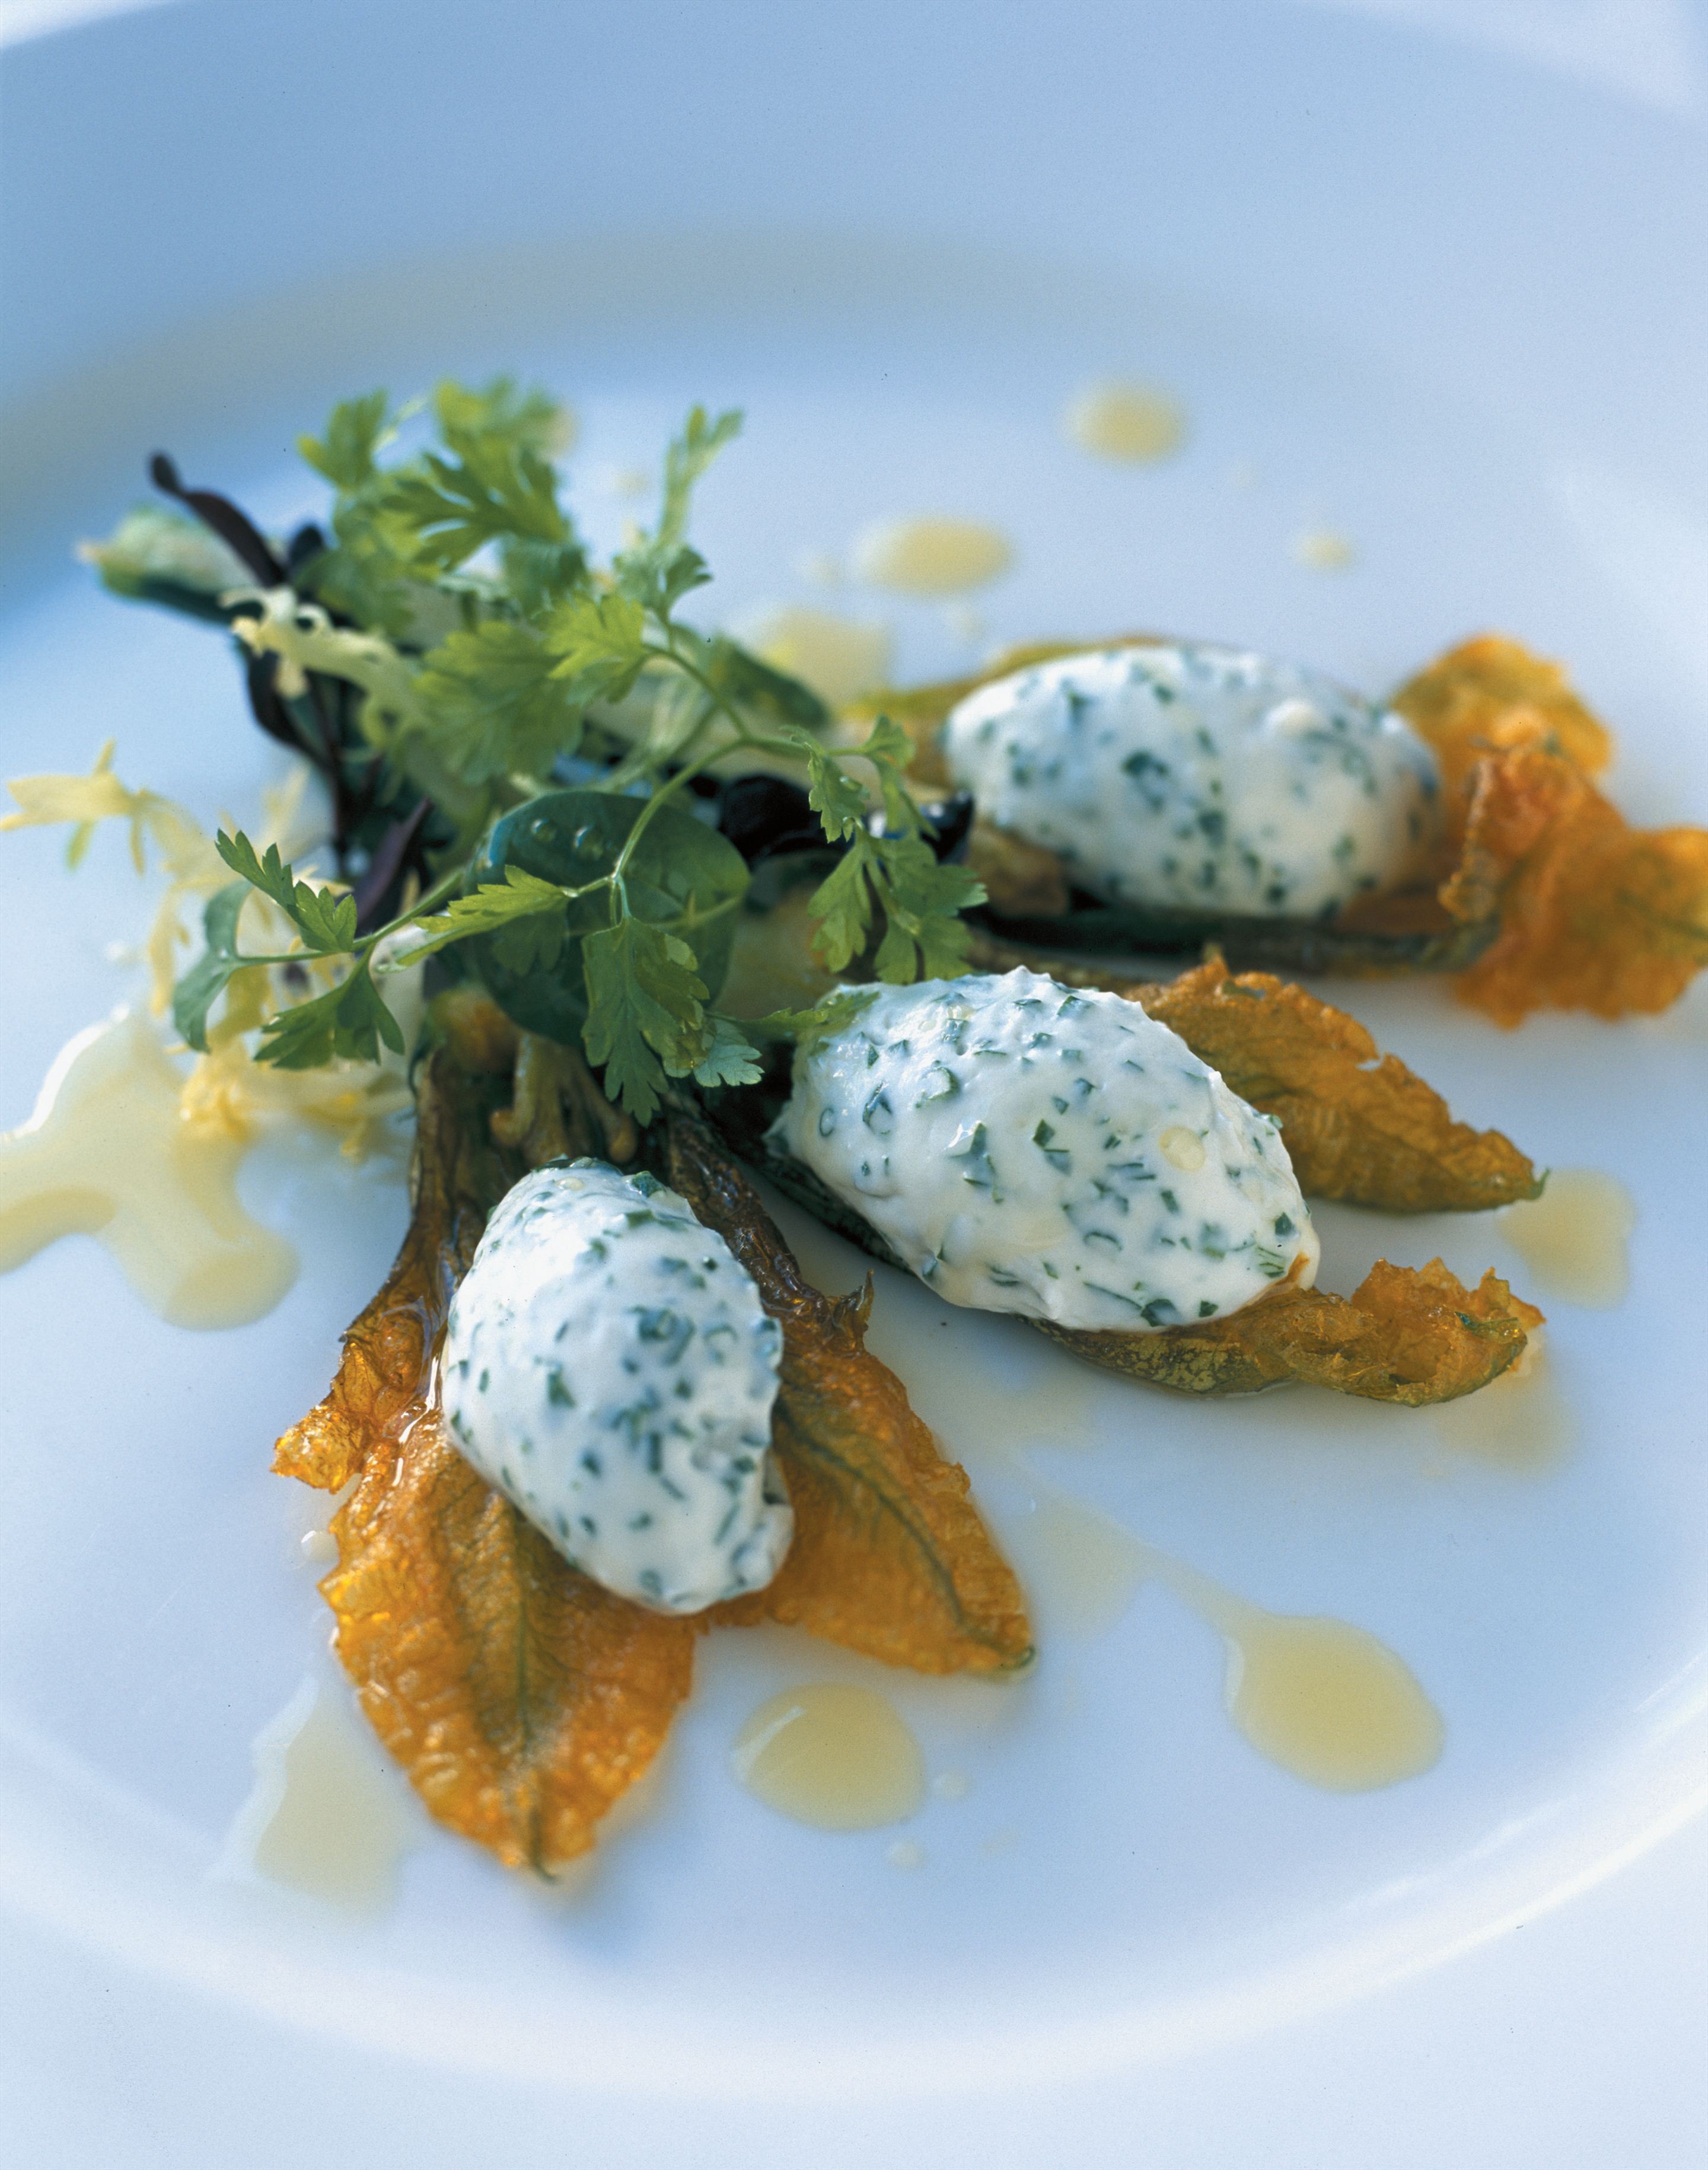 Deep-fried zucchini flowers with chive and shallot-whipped goat’s curd and a herb salad